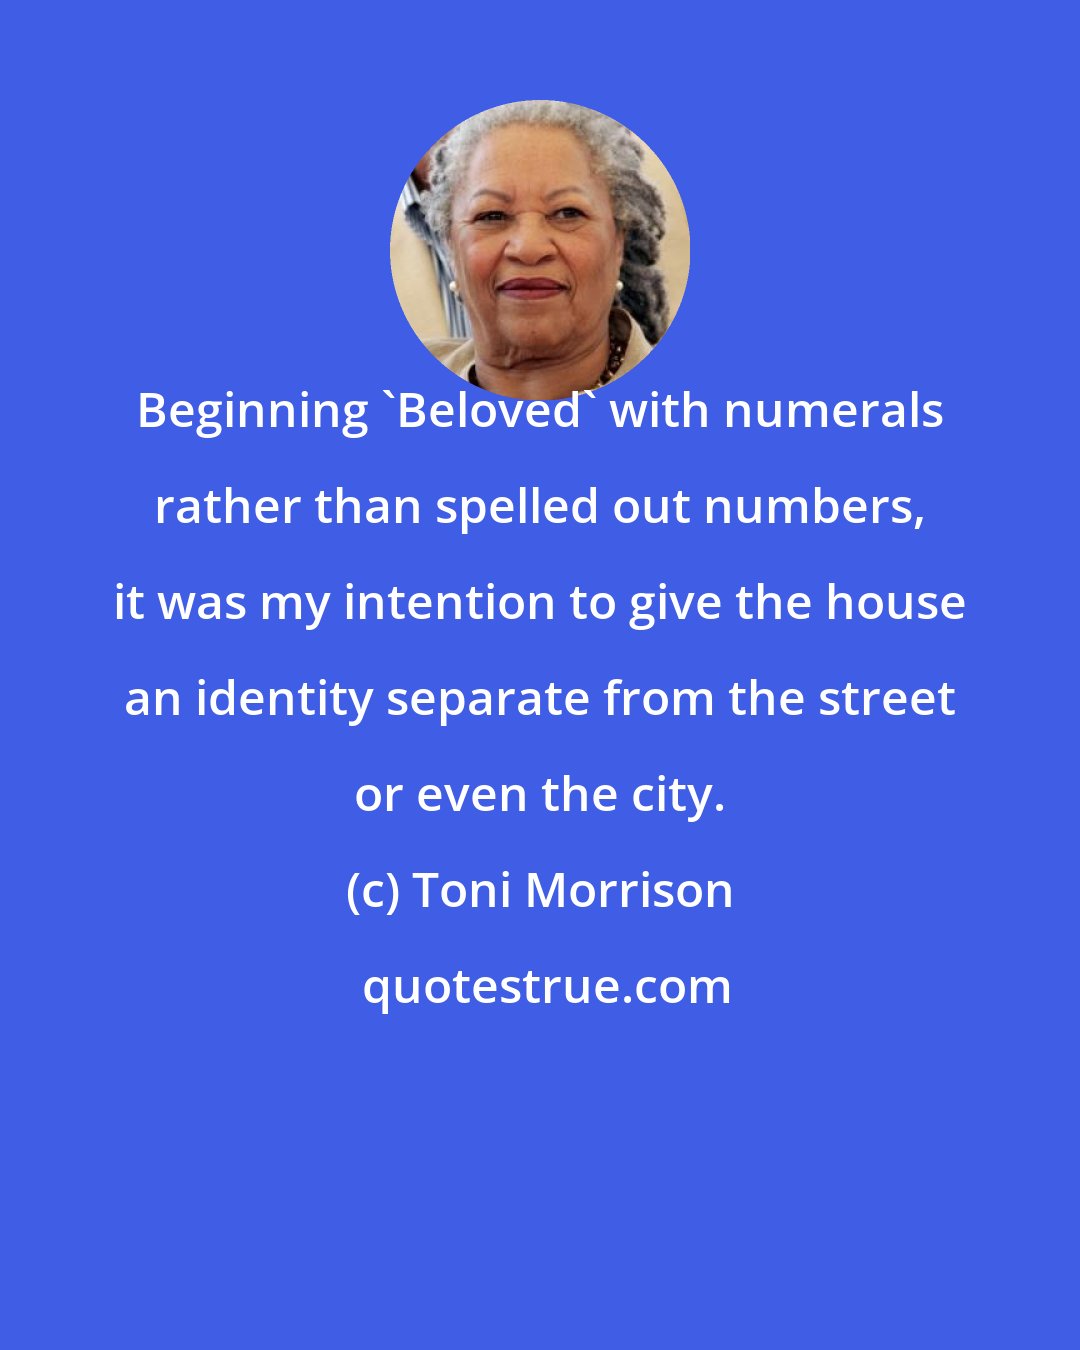 Toni Morrison: Beginning 'Beloved' with numerals rather than spelled out numbers, it was my intention to give the house an identity separate from the street or even the city.